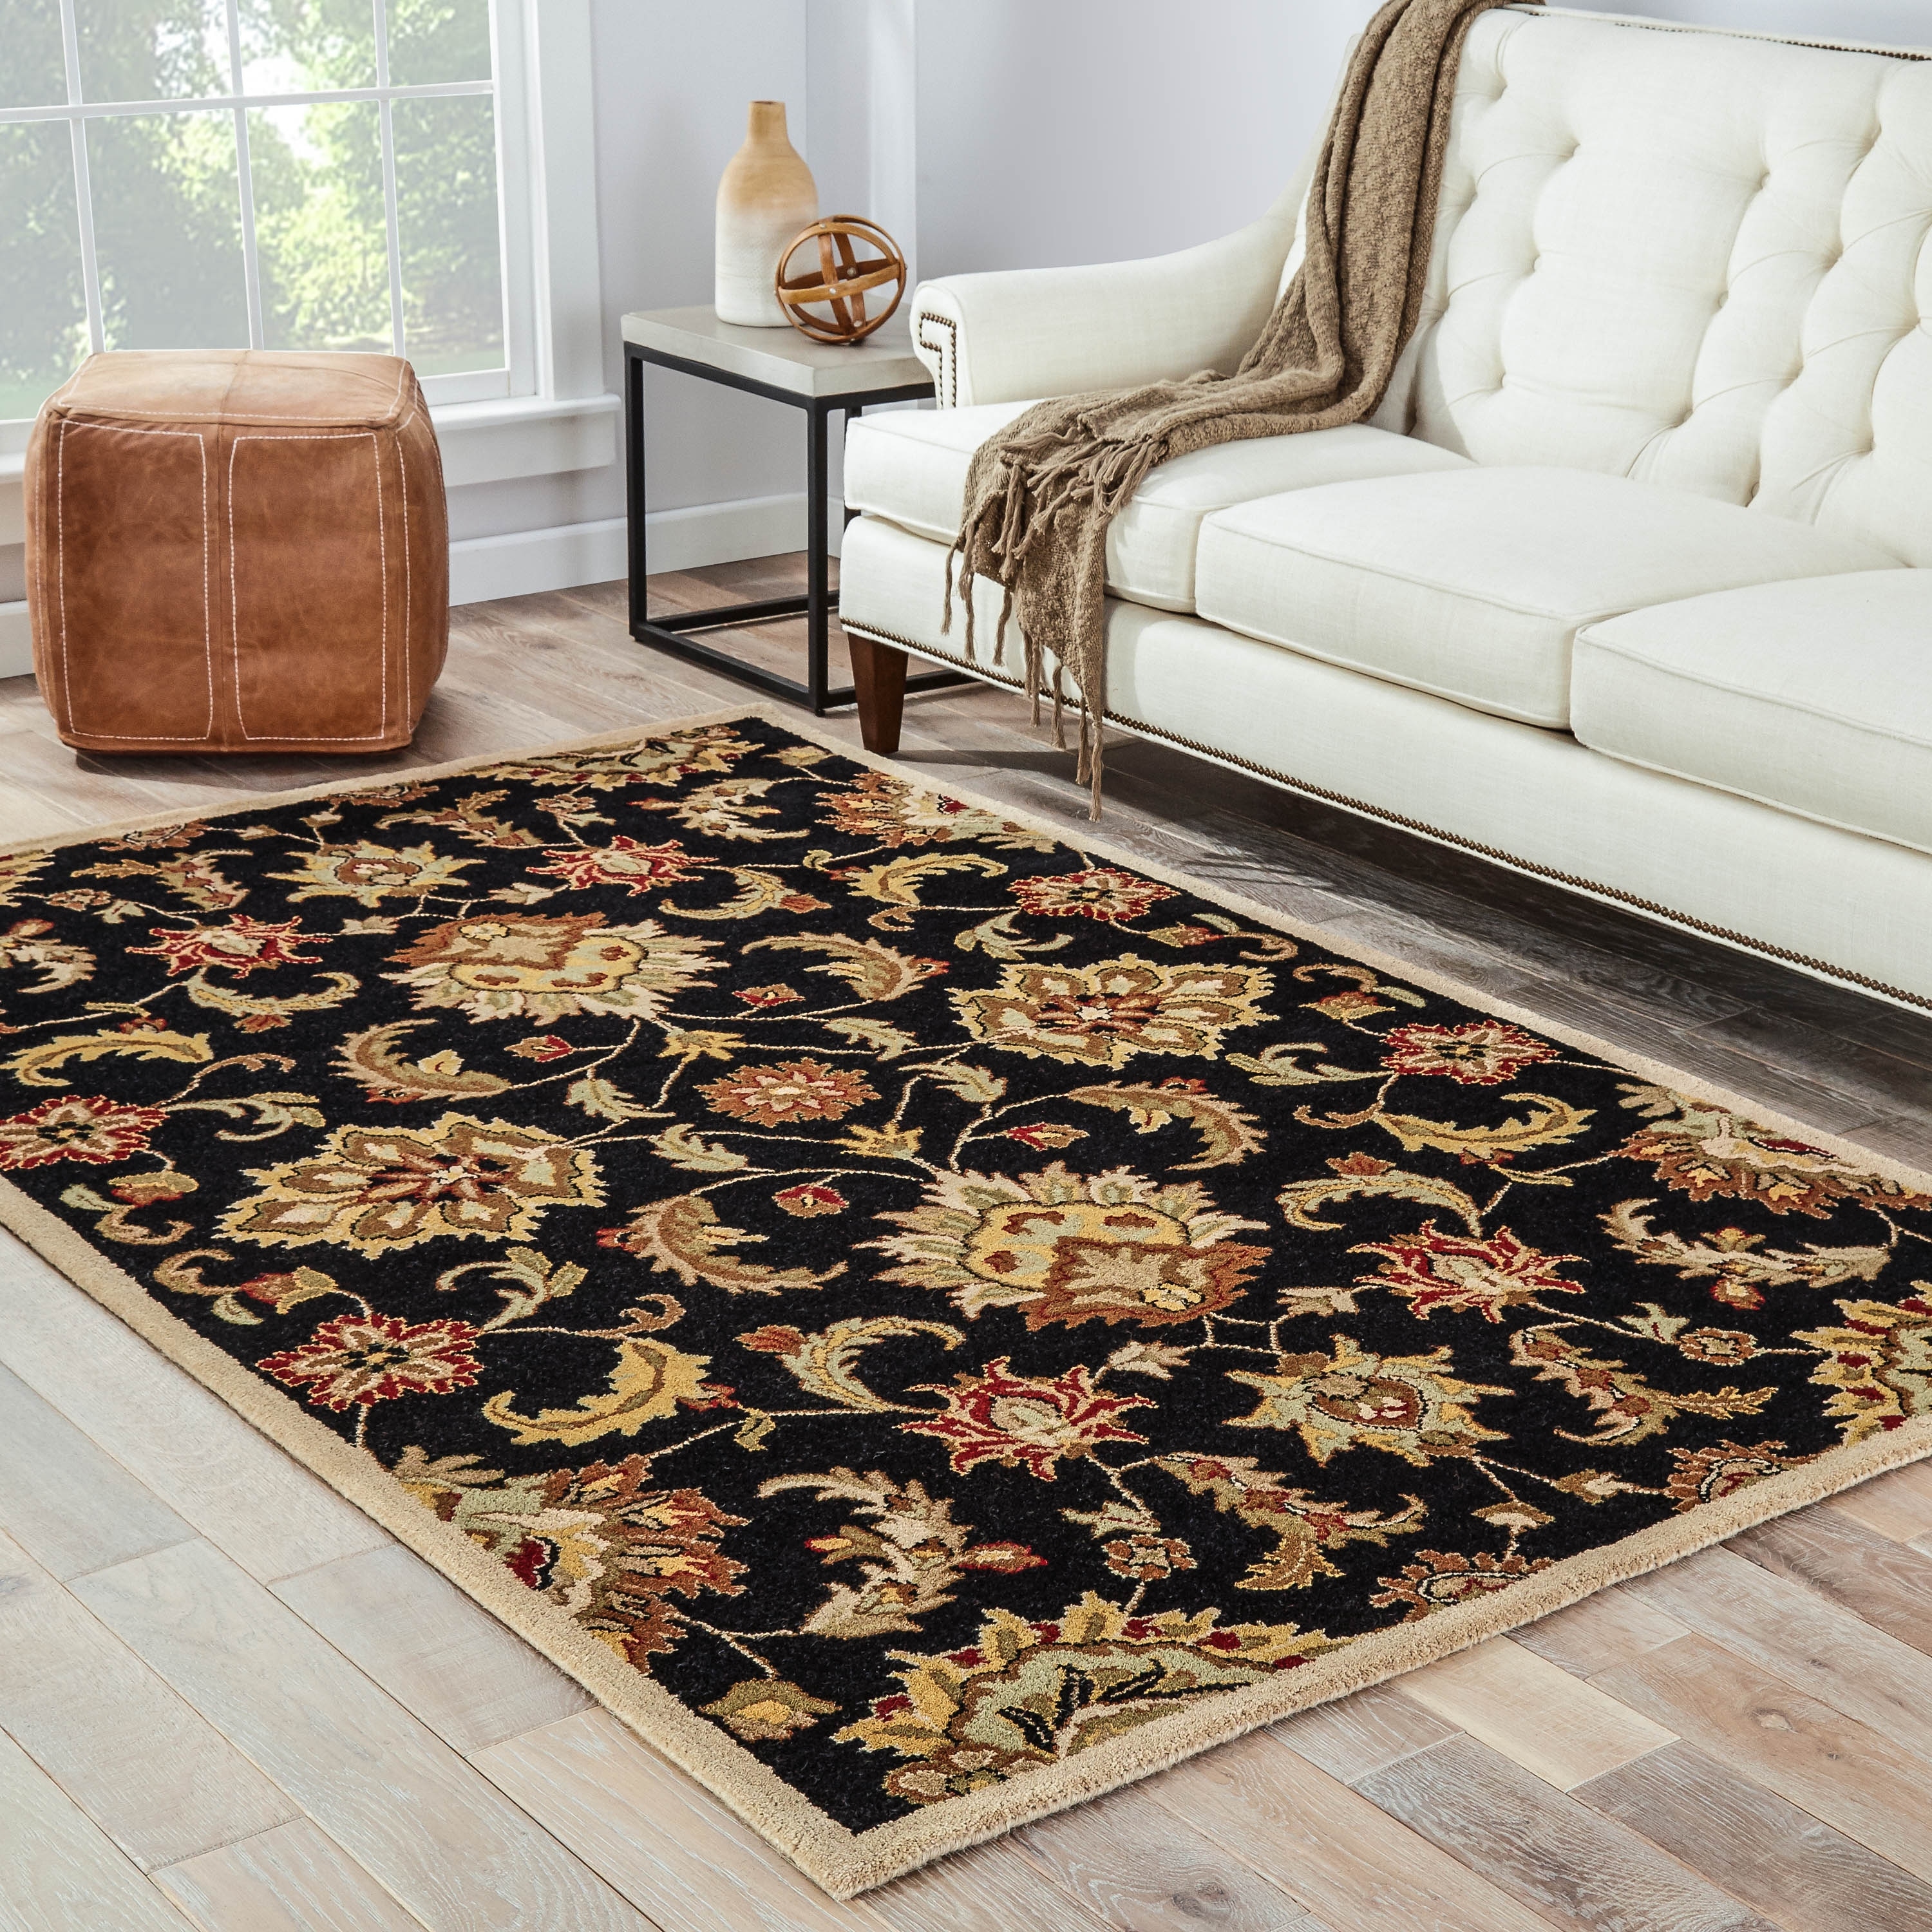 SUPERIOR Conventry Traditional Oriental Abstract Floral Polypropylene Indoor Area Rug Beige 4x6 